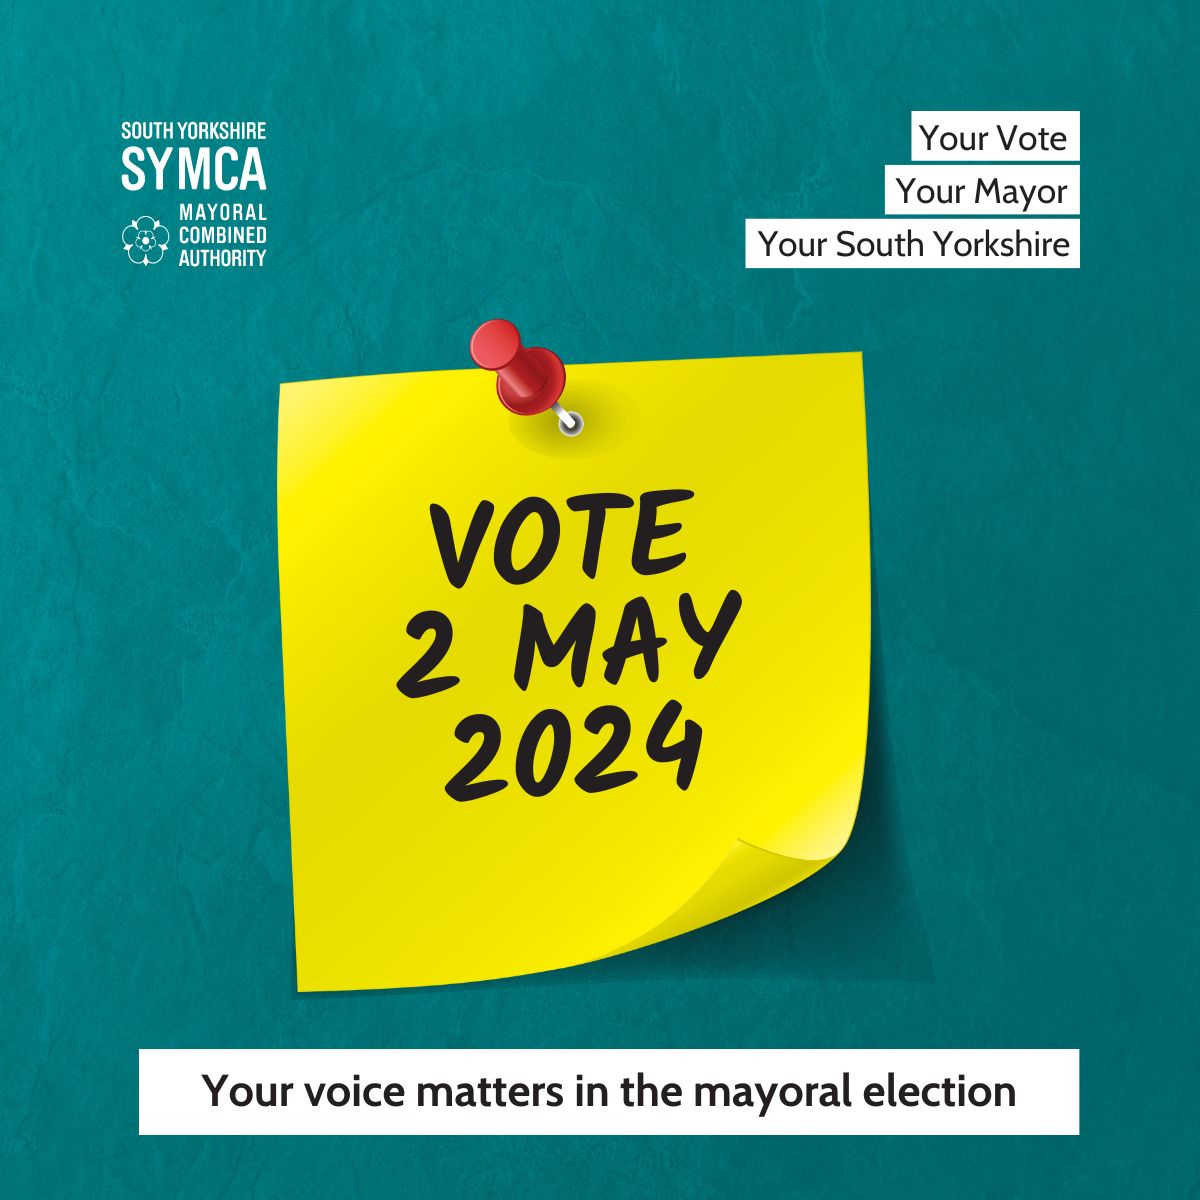 Polling stations are now open! Voting is now open for the South Yorkshire Mayoral Elections. Residents have until 10pm tonight to cast their vote. Find your local polling station here: maps.doncaster.gov.uk/portal/apps/we…